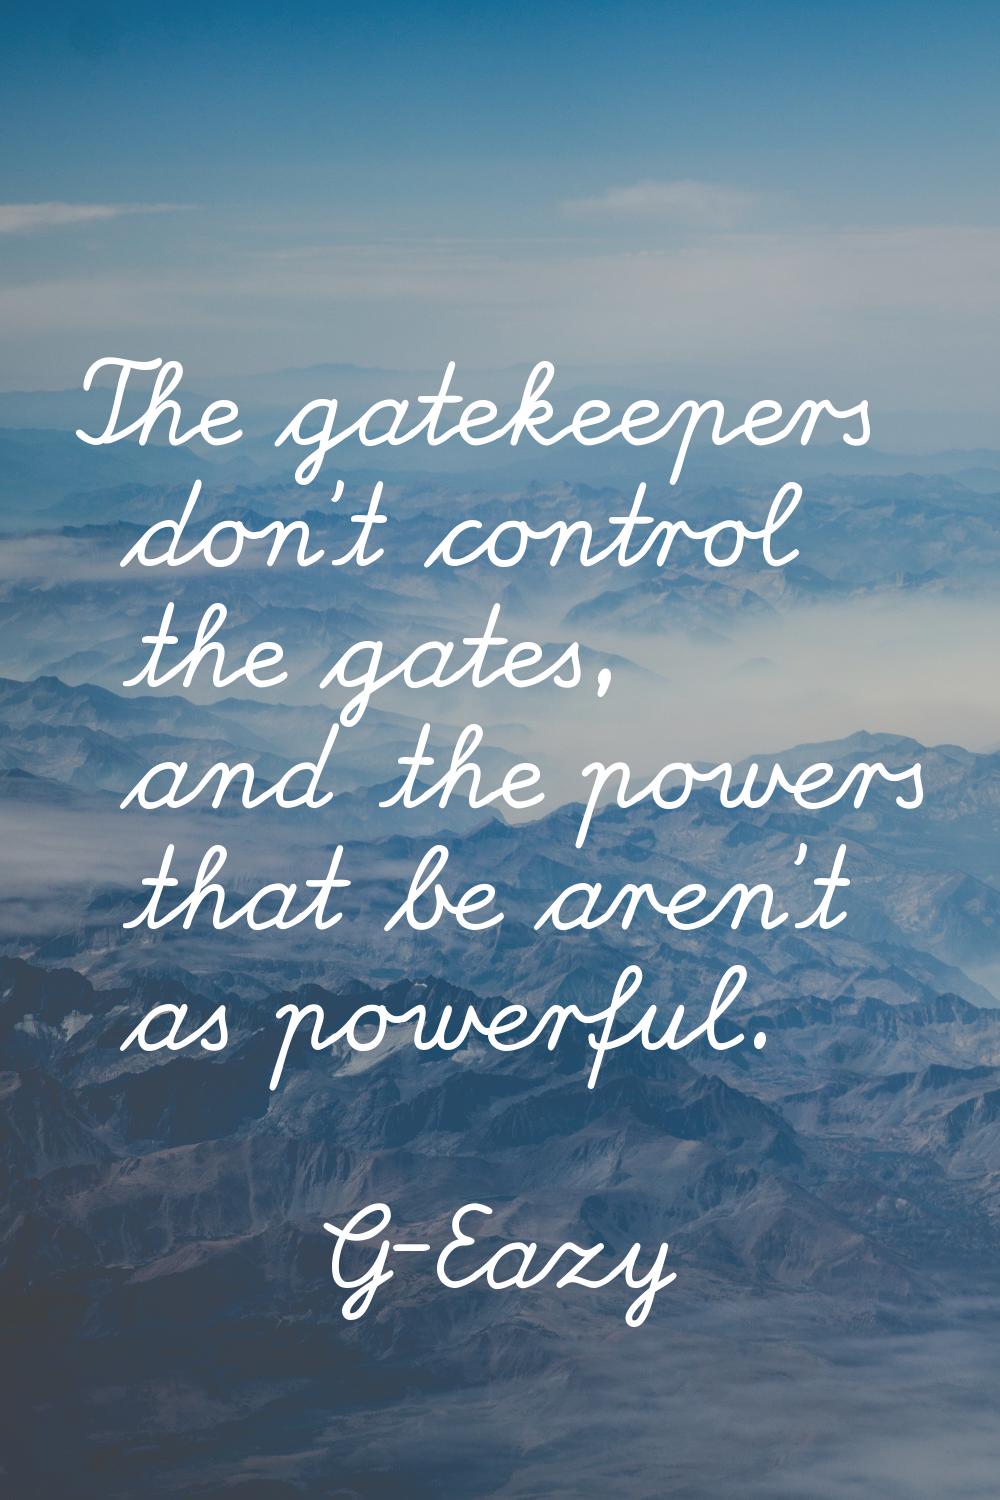 The gatekeepers don't control the gates, and the powers that be aren't as powerful.